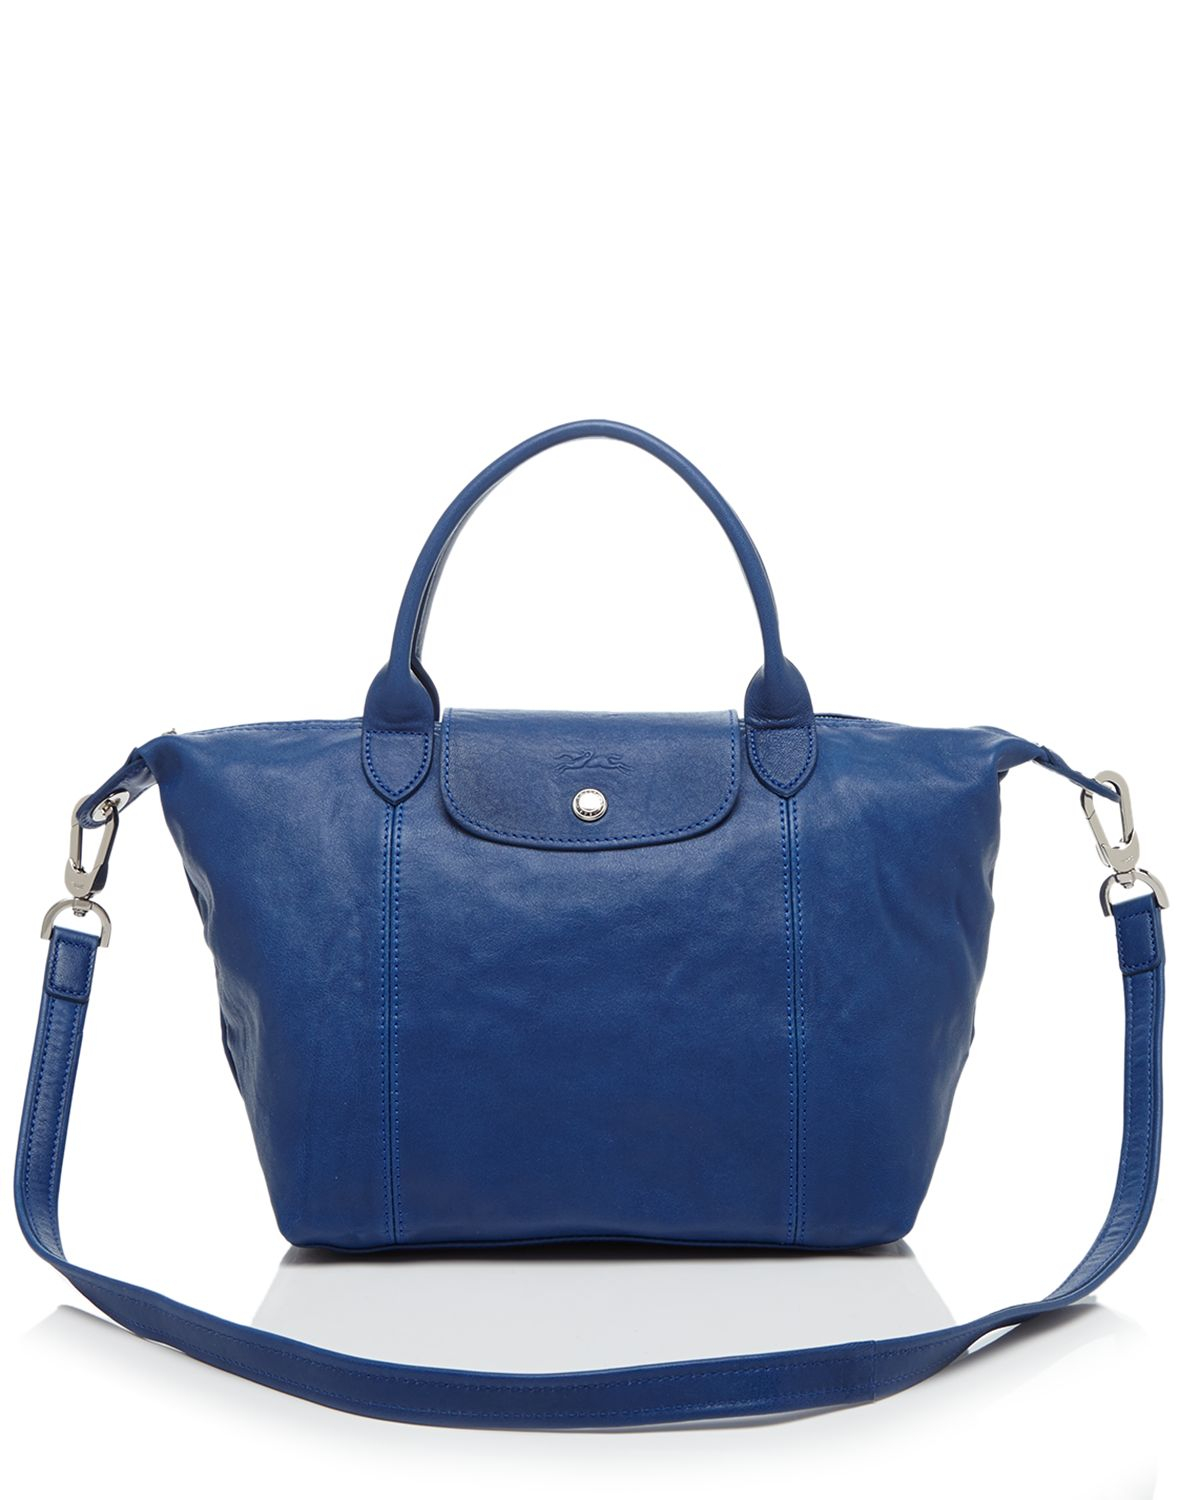 Longchamp Shoulder Bag - Le Pliage Leather Cuir Small in Blue | Lyst